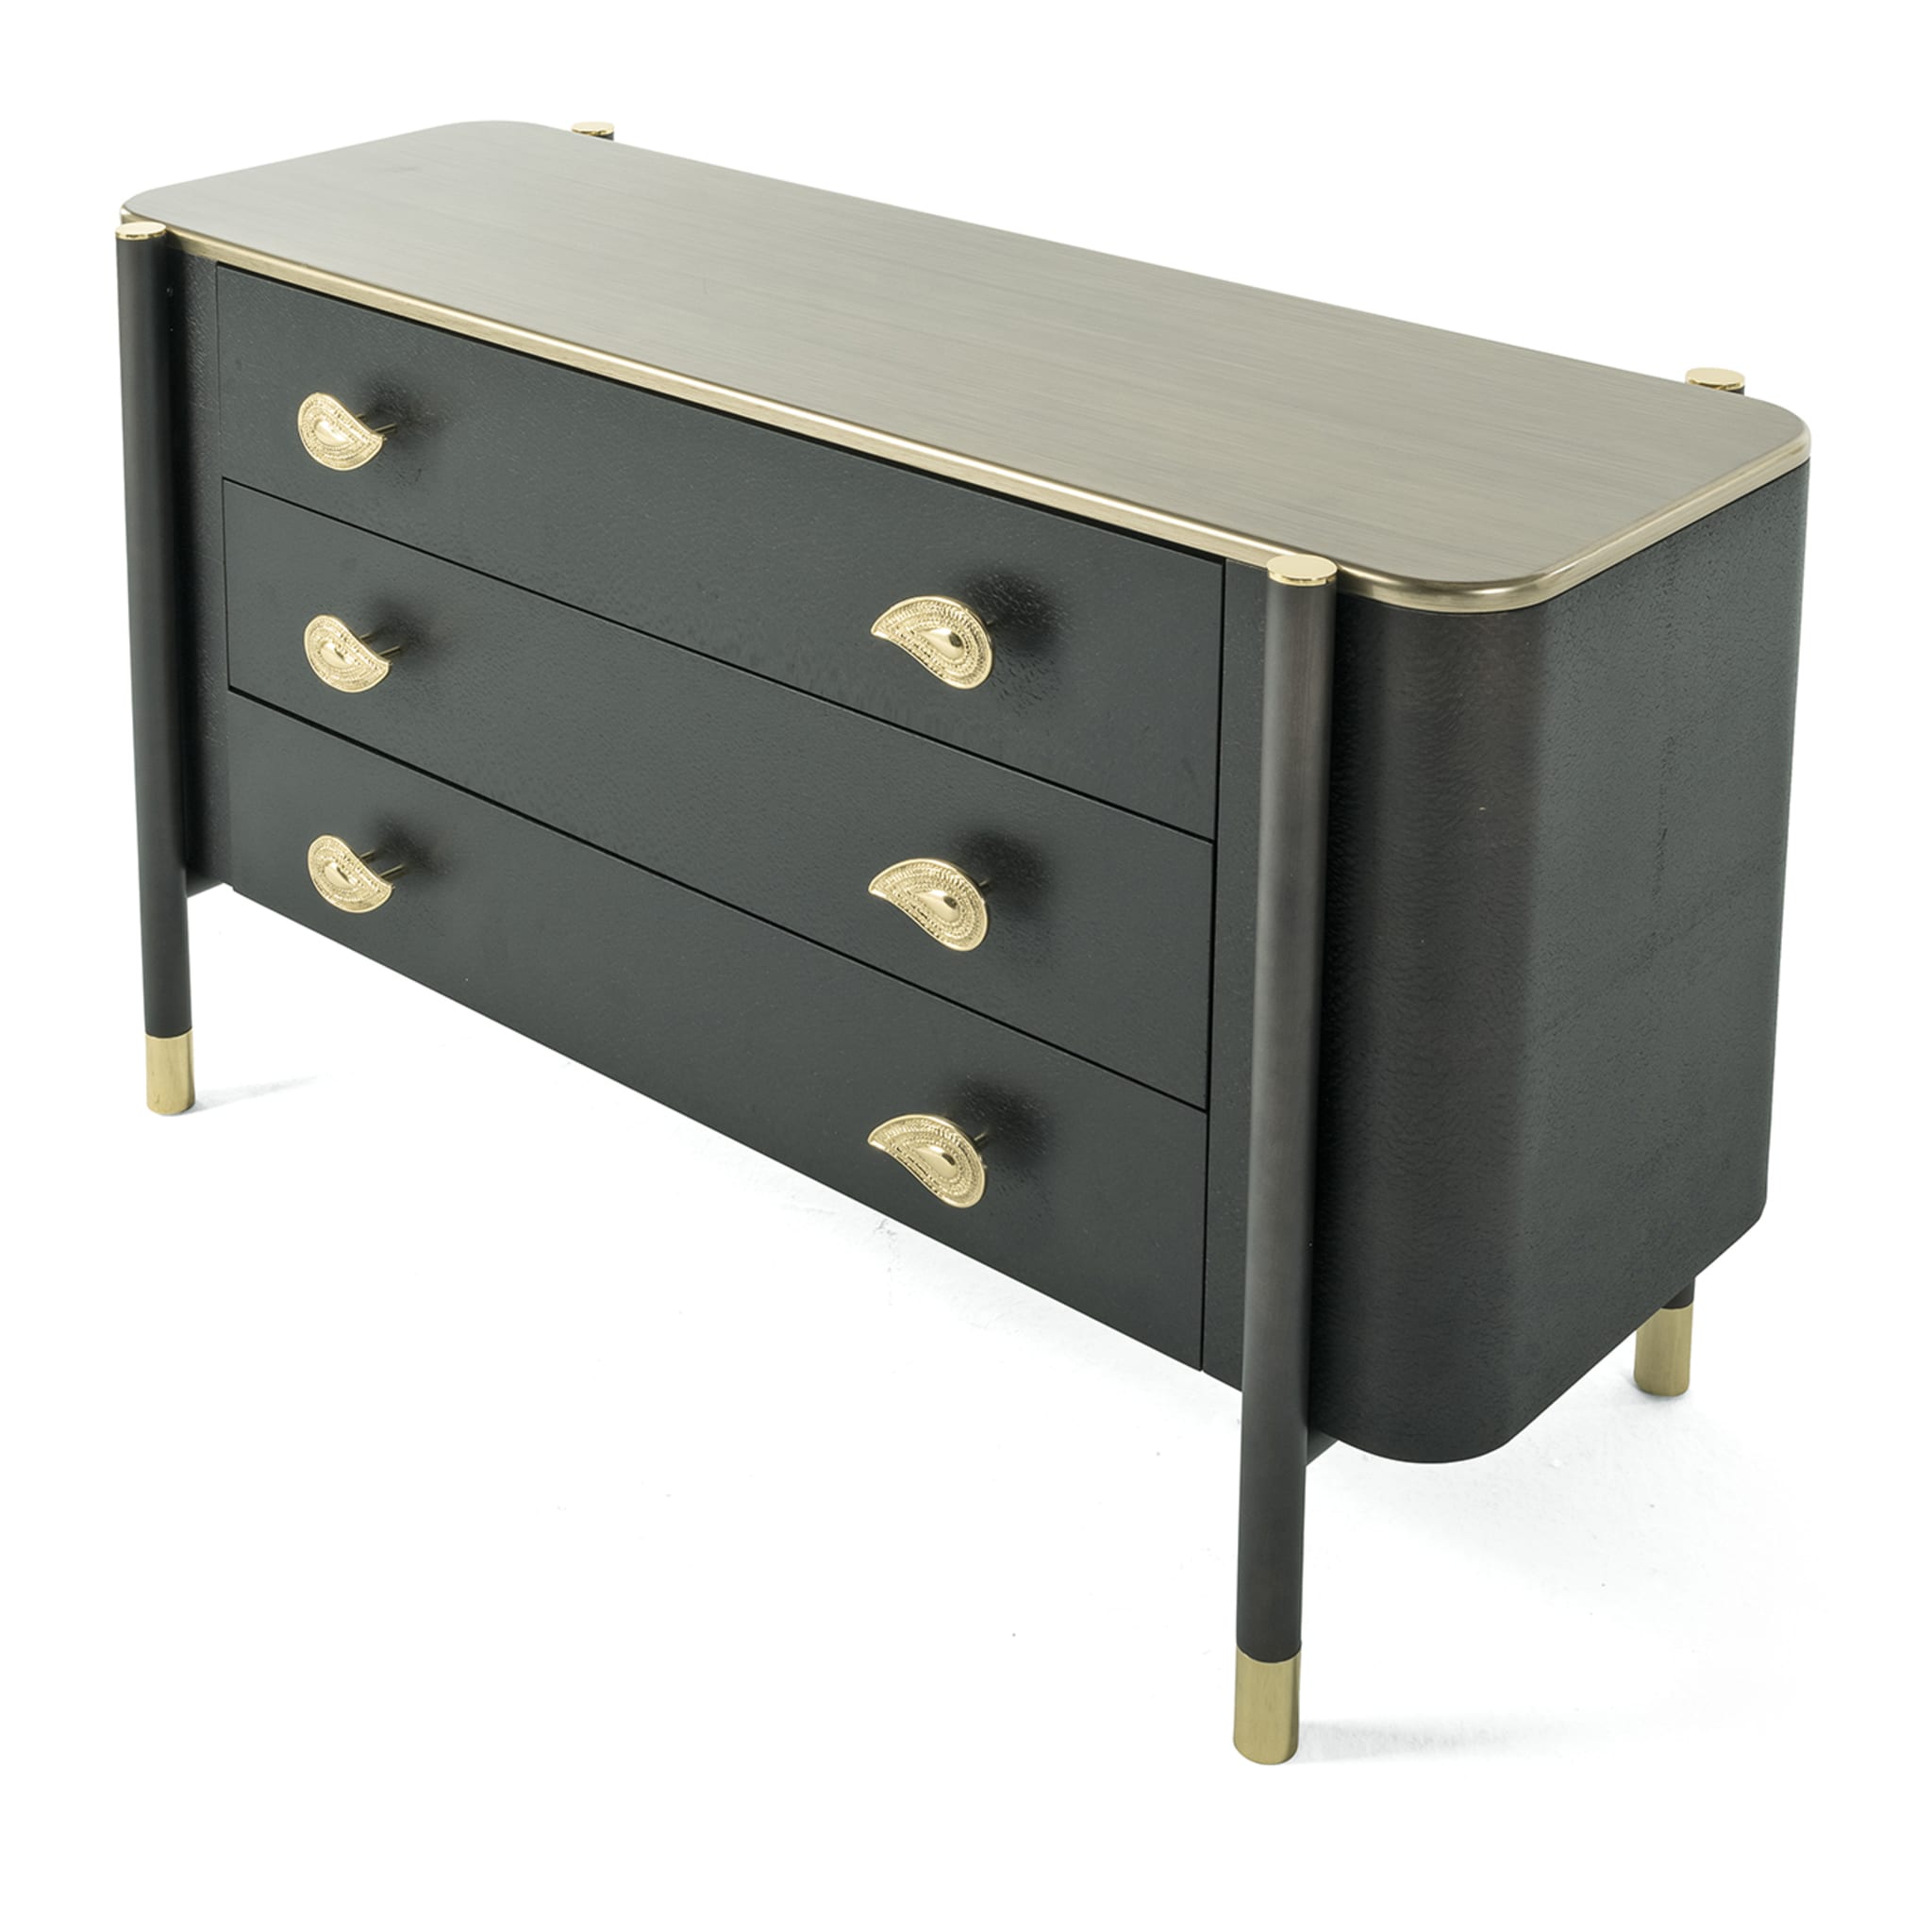 Woodstock Chest of Drawers - Alternative view 3